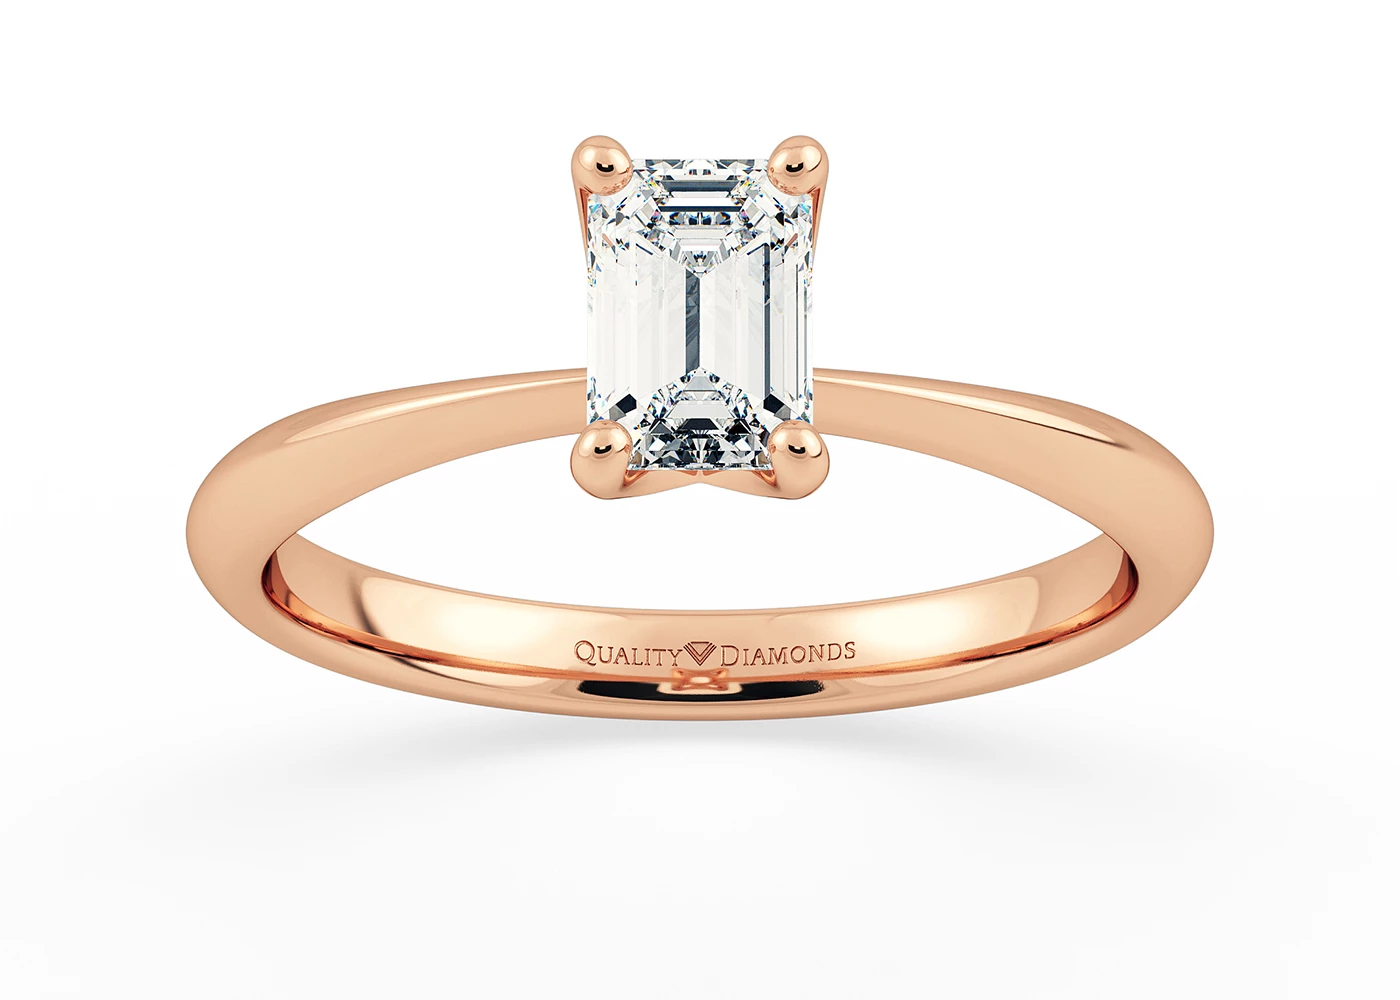 One Carat Emerald Solitaire Diamond Engagement Ring in 18K Rose Gold